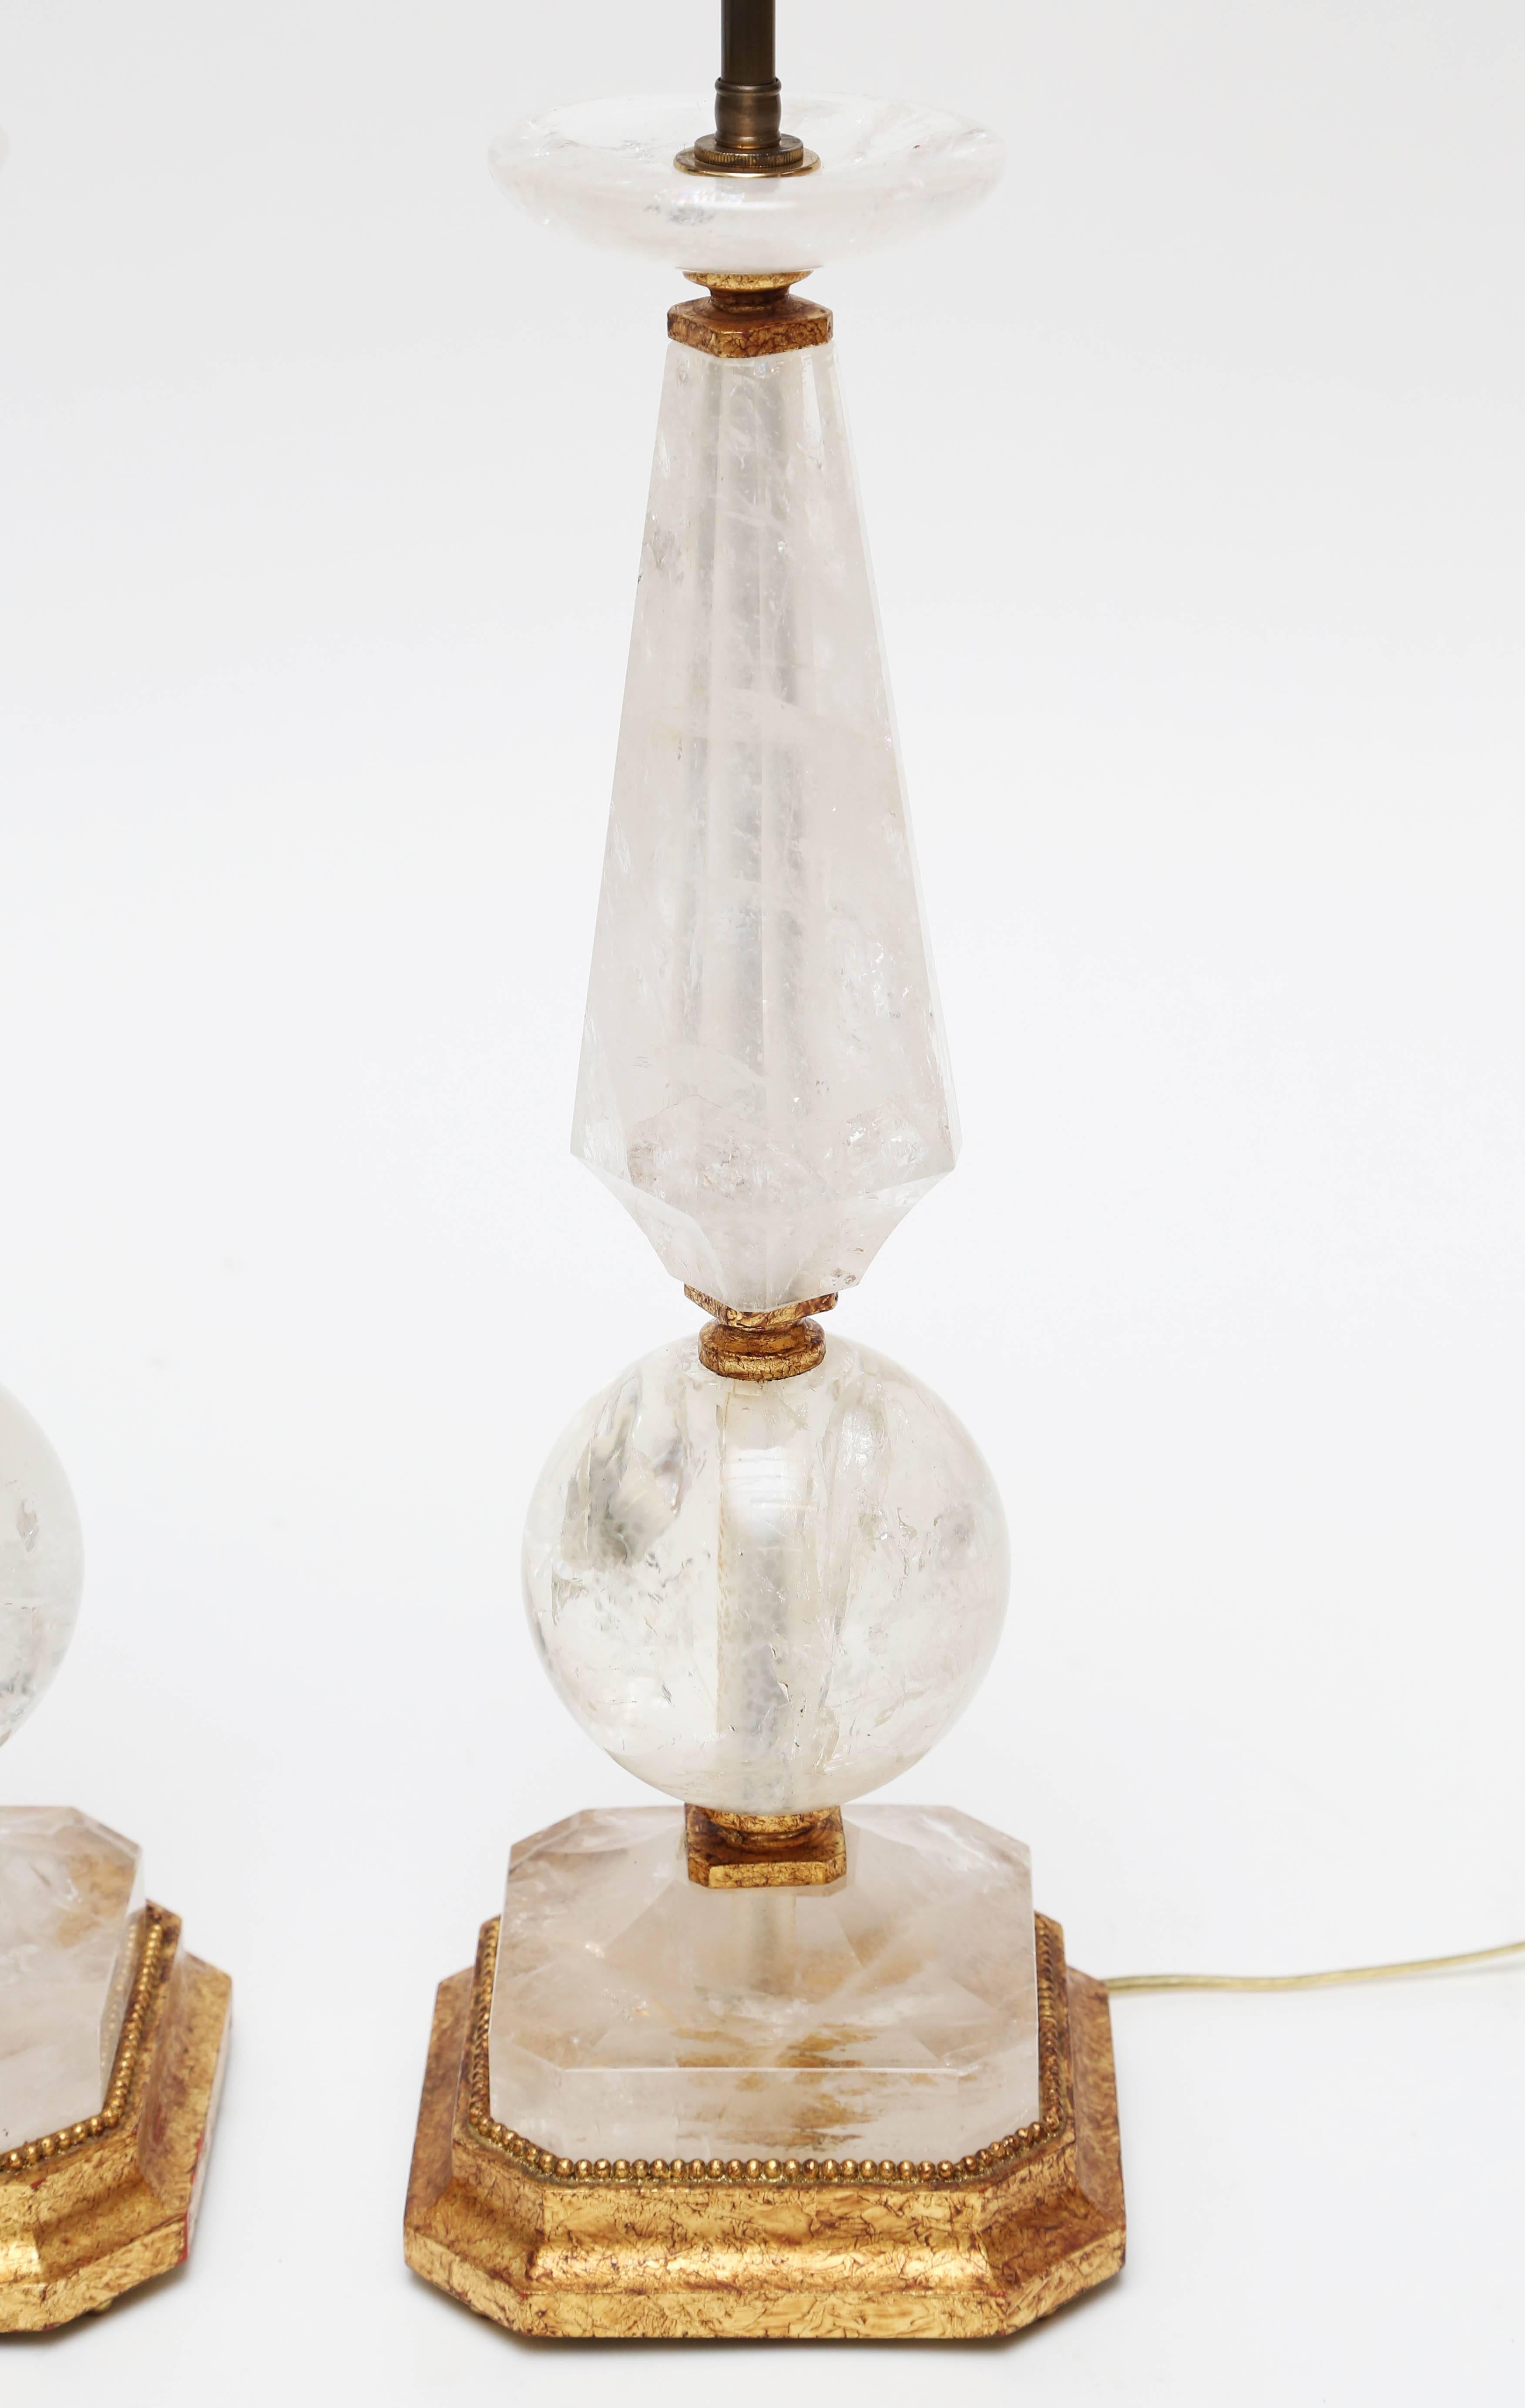 A wonderful pair of vintage rock crystal lamps.
A classical form, circa 1970s.